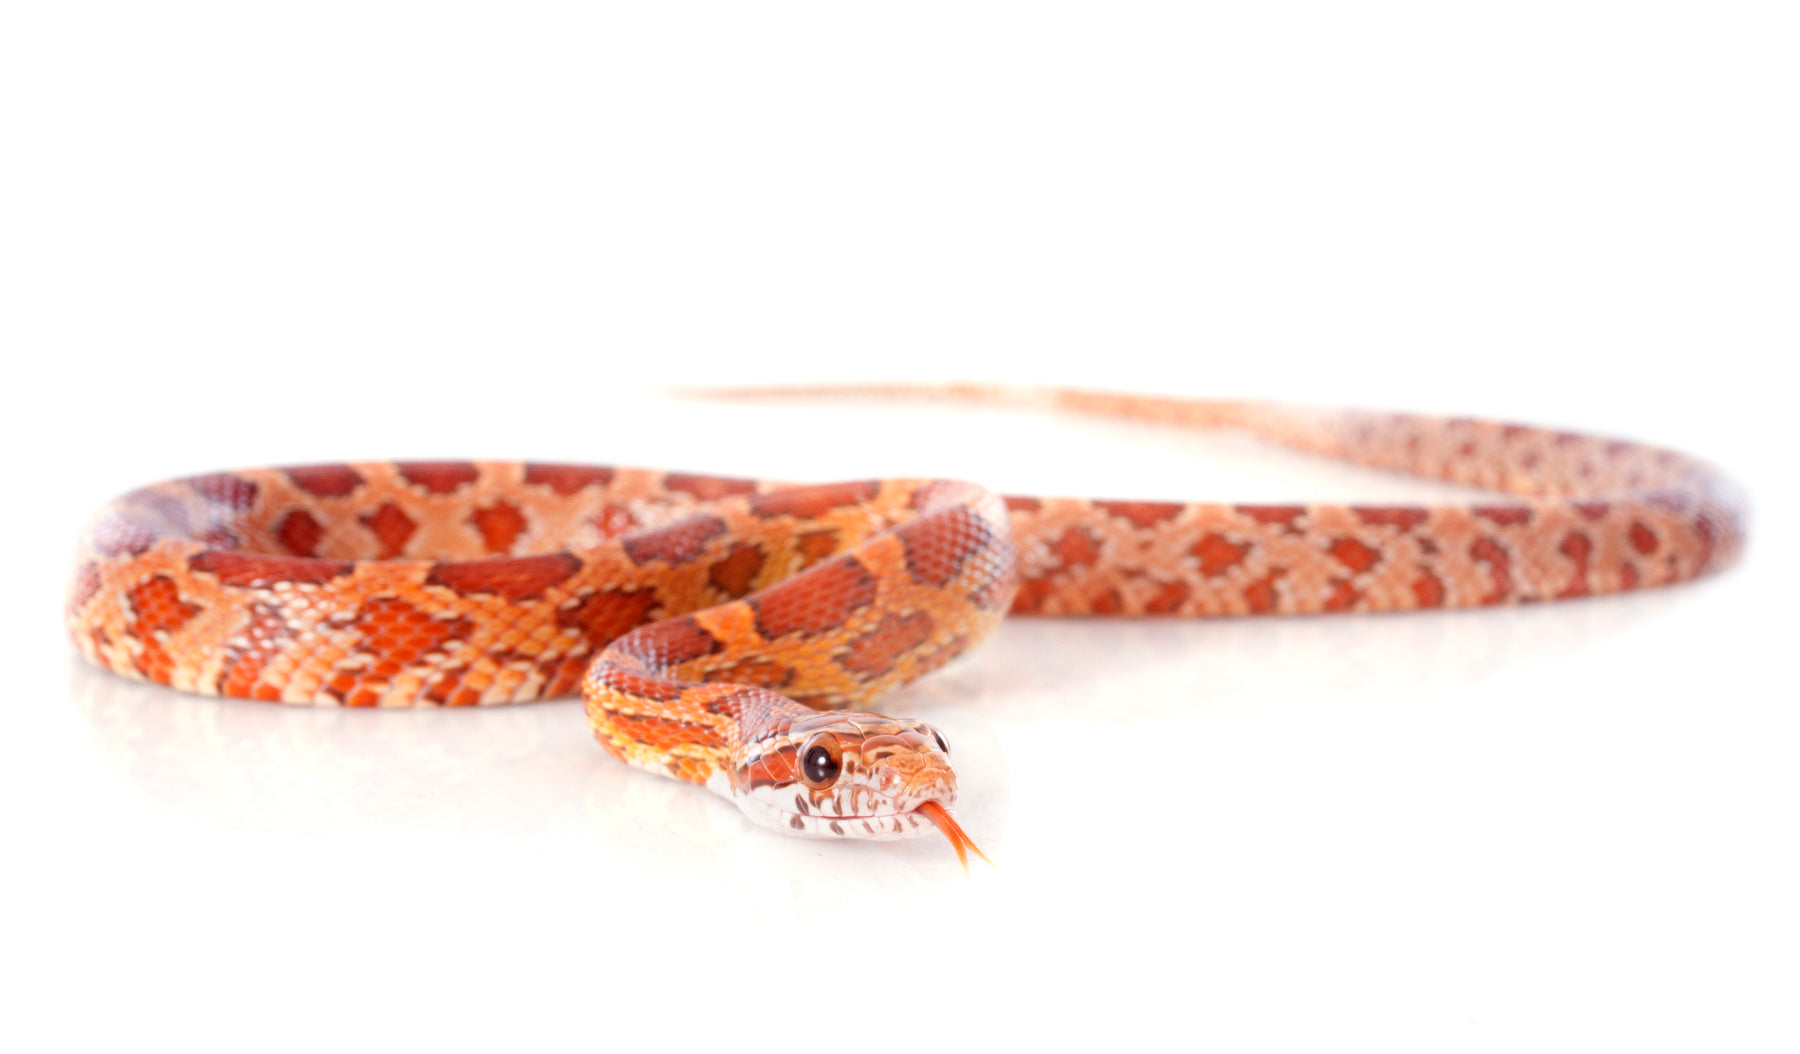 How to Care for Your Corn Snake